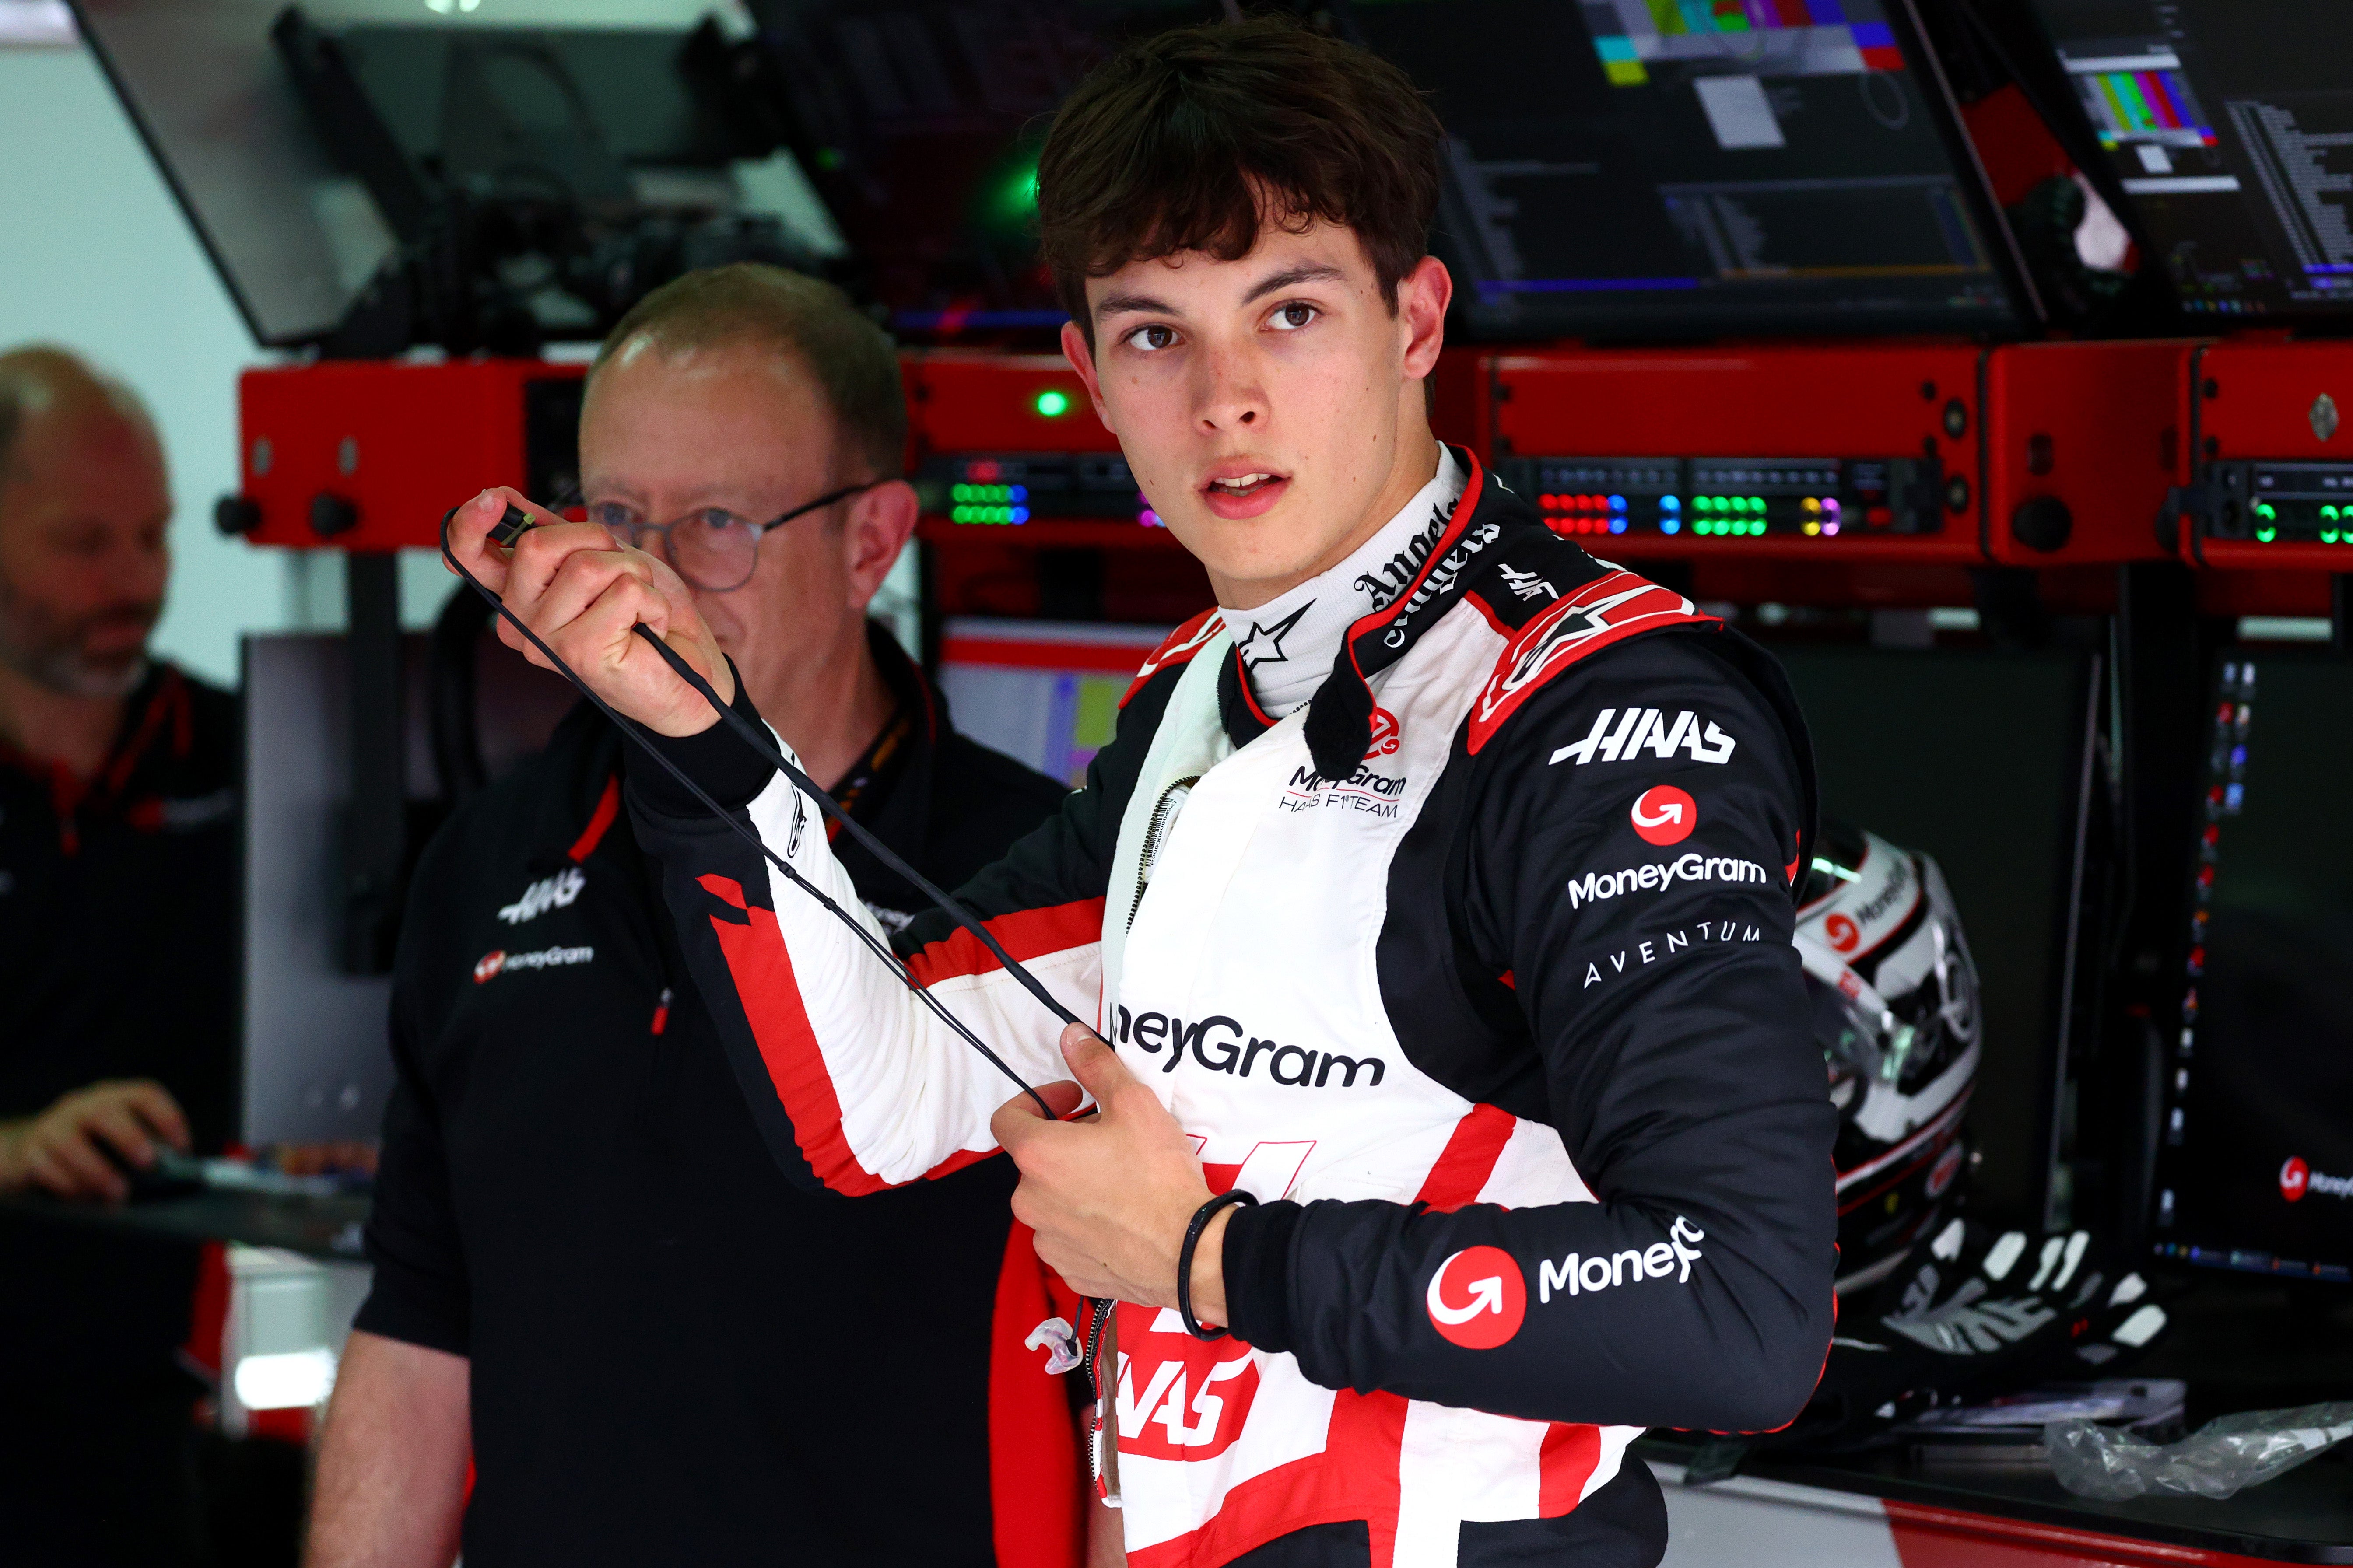 The 19-year-old has signed a multi-year contract with Haas